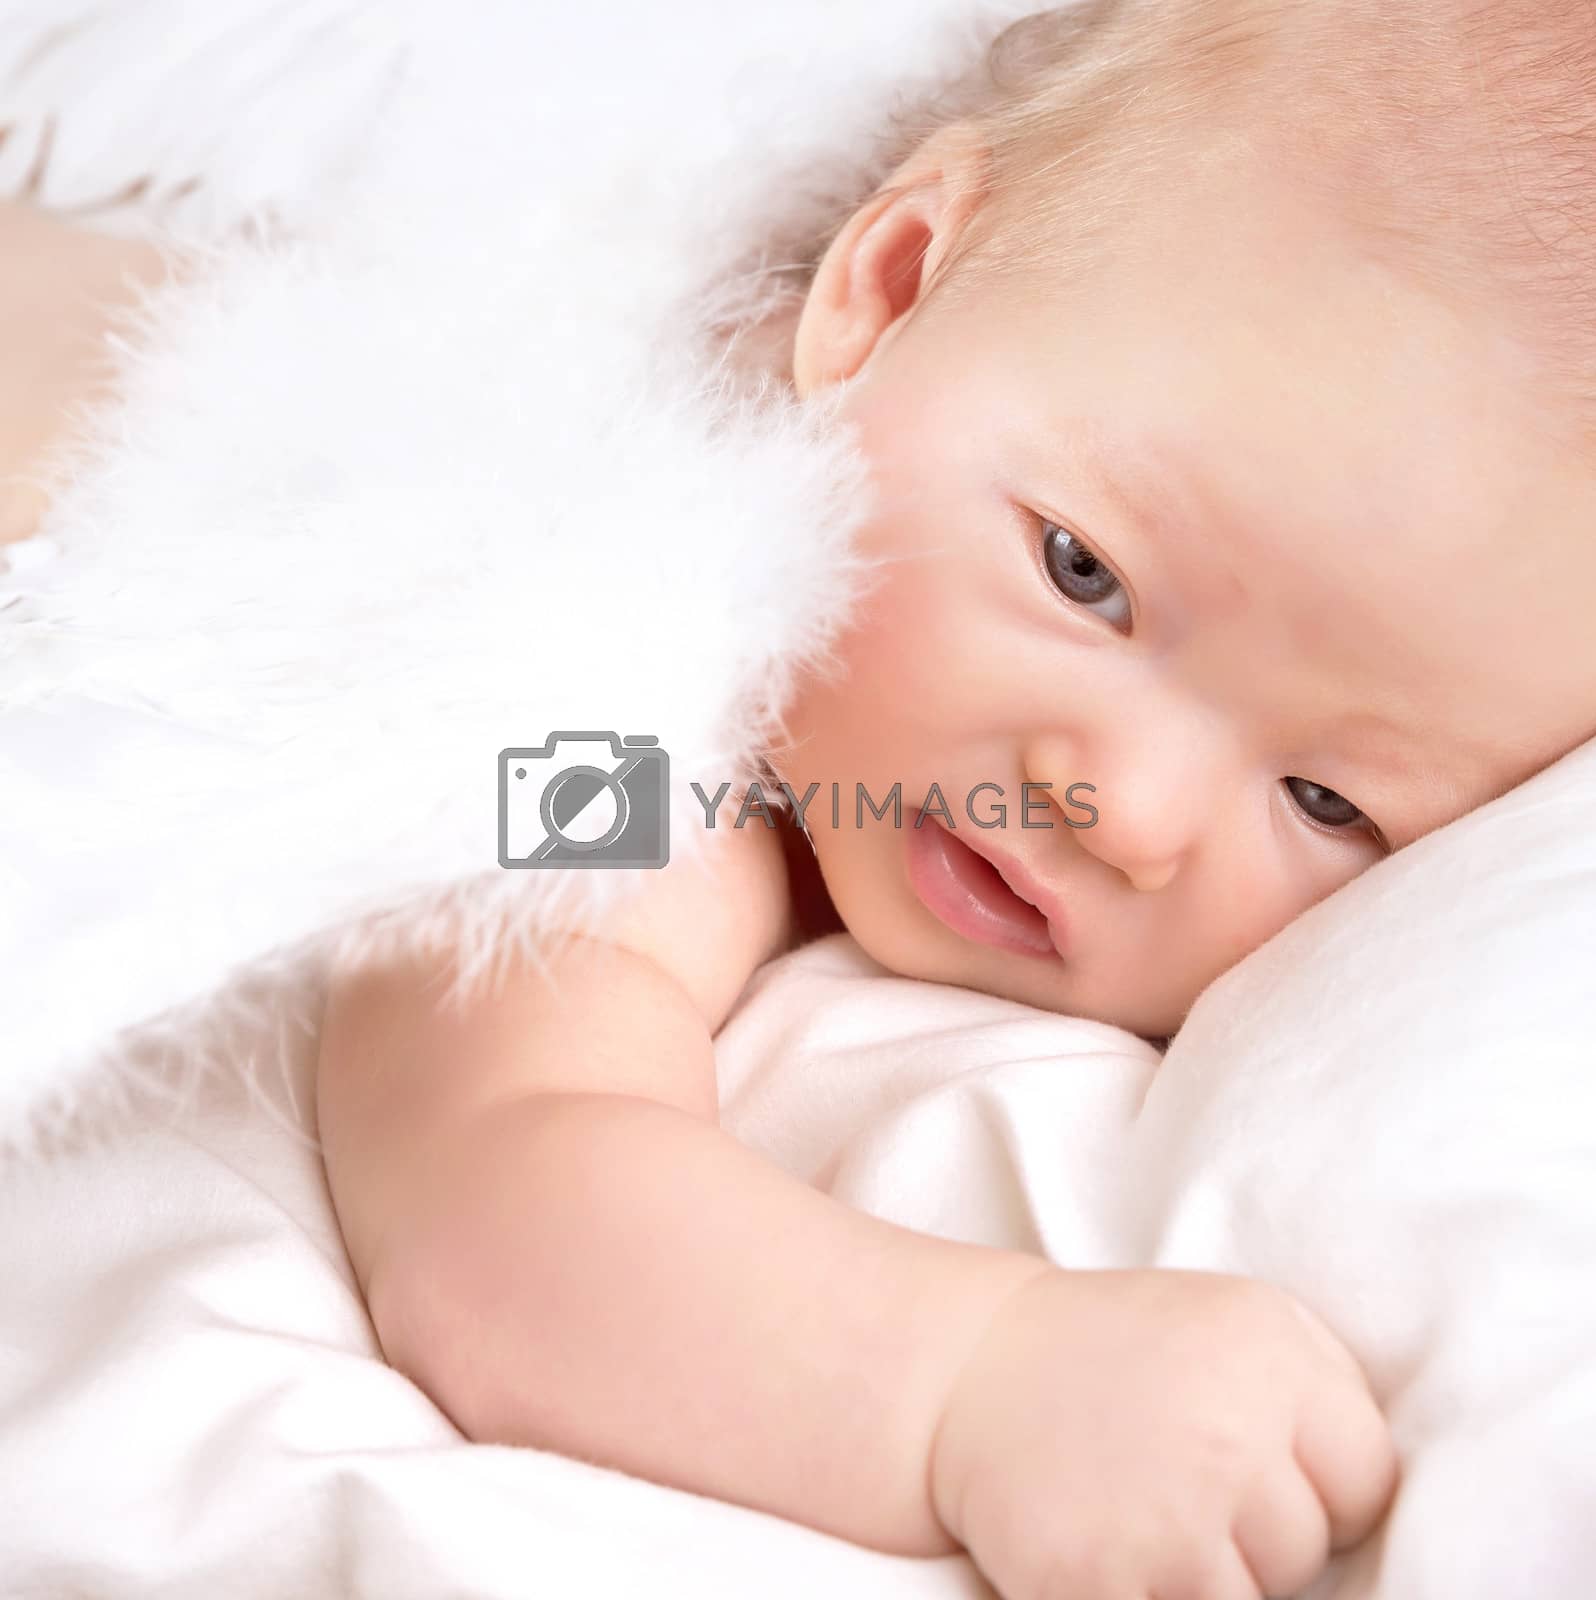 Royalty free image of Sweet angel baby by Anna_Omelchenko